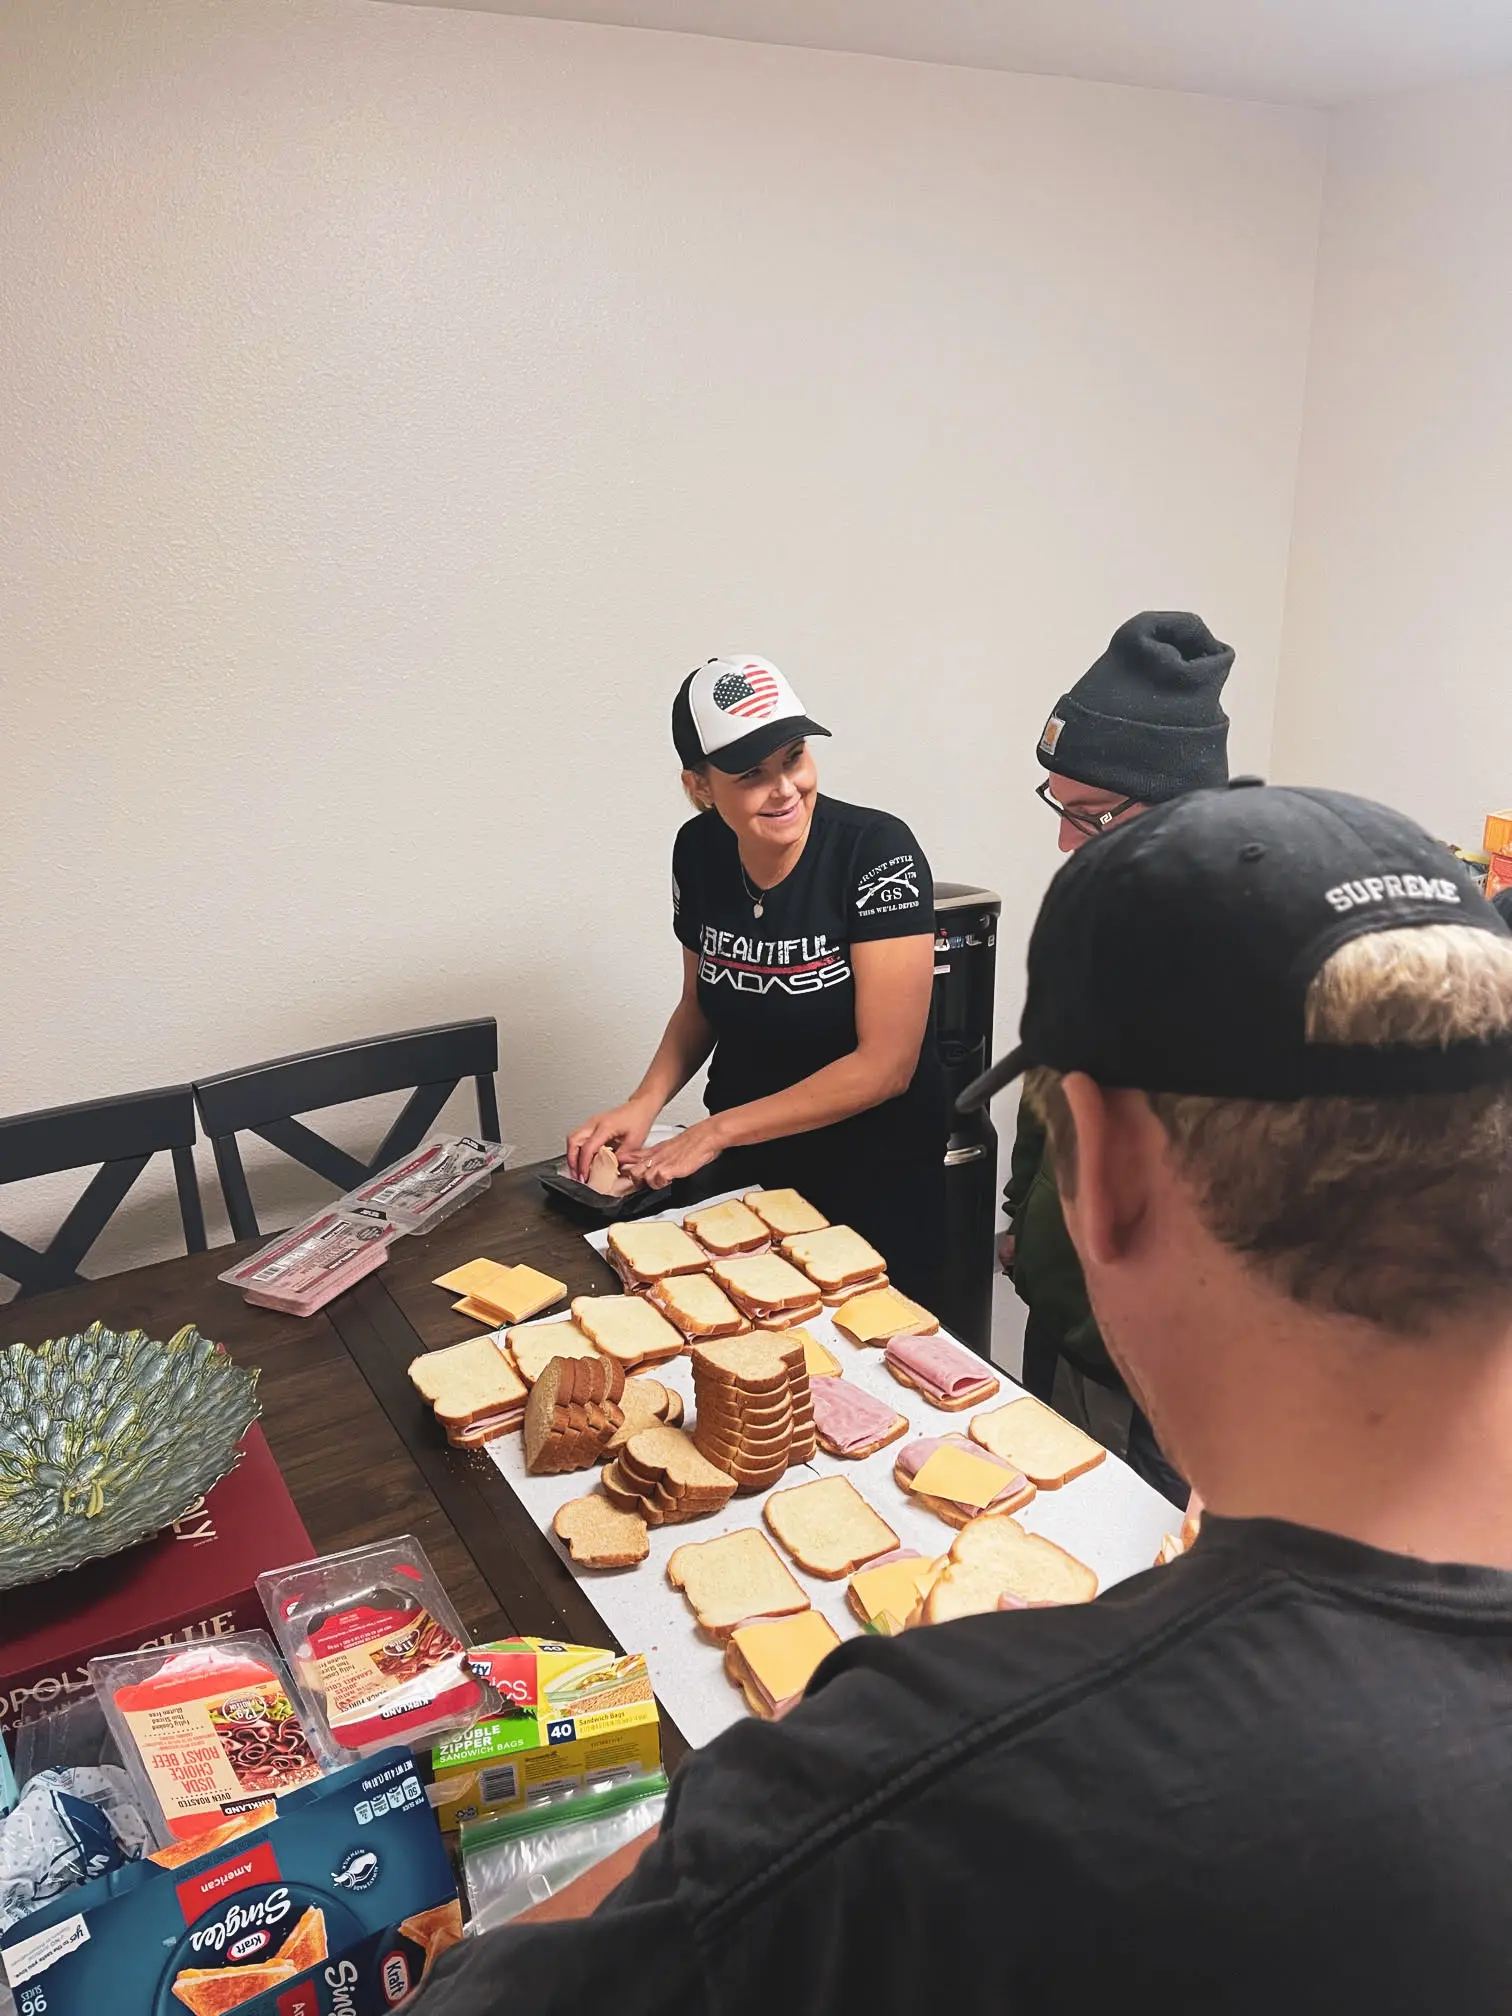 Mental health outpatient volunteer work. Volunteers are making sandwiches for the homeless